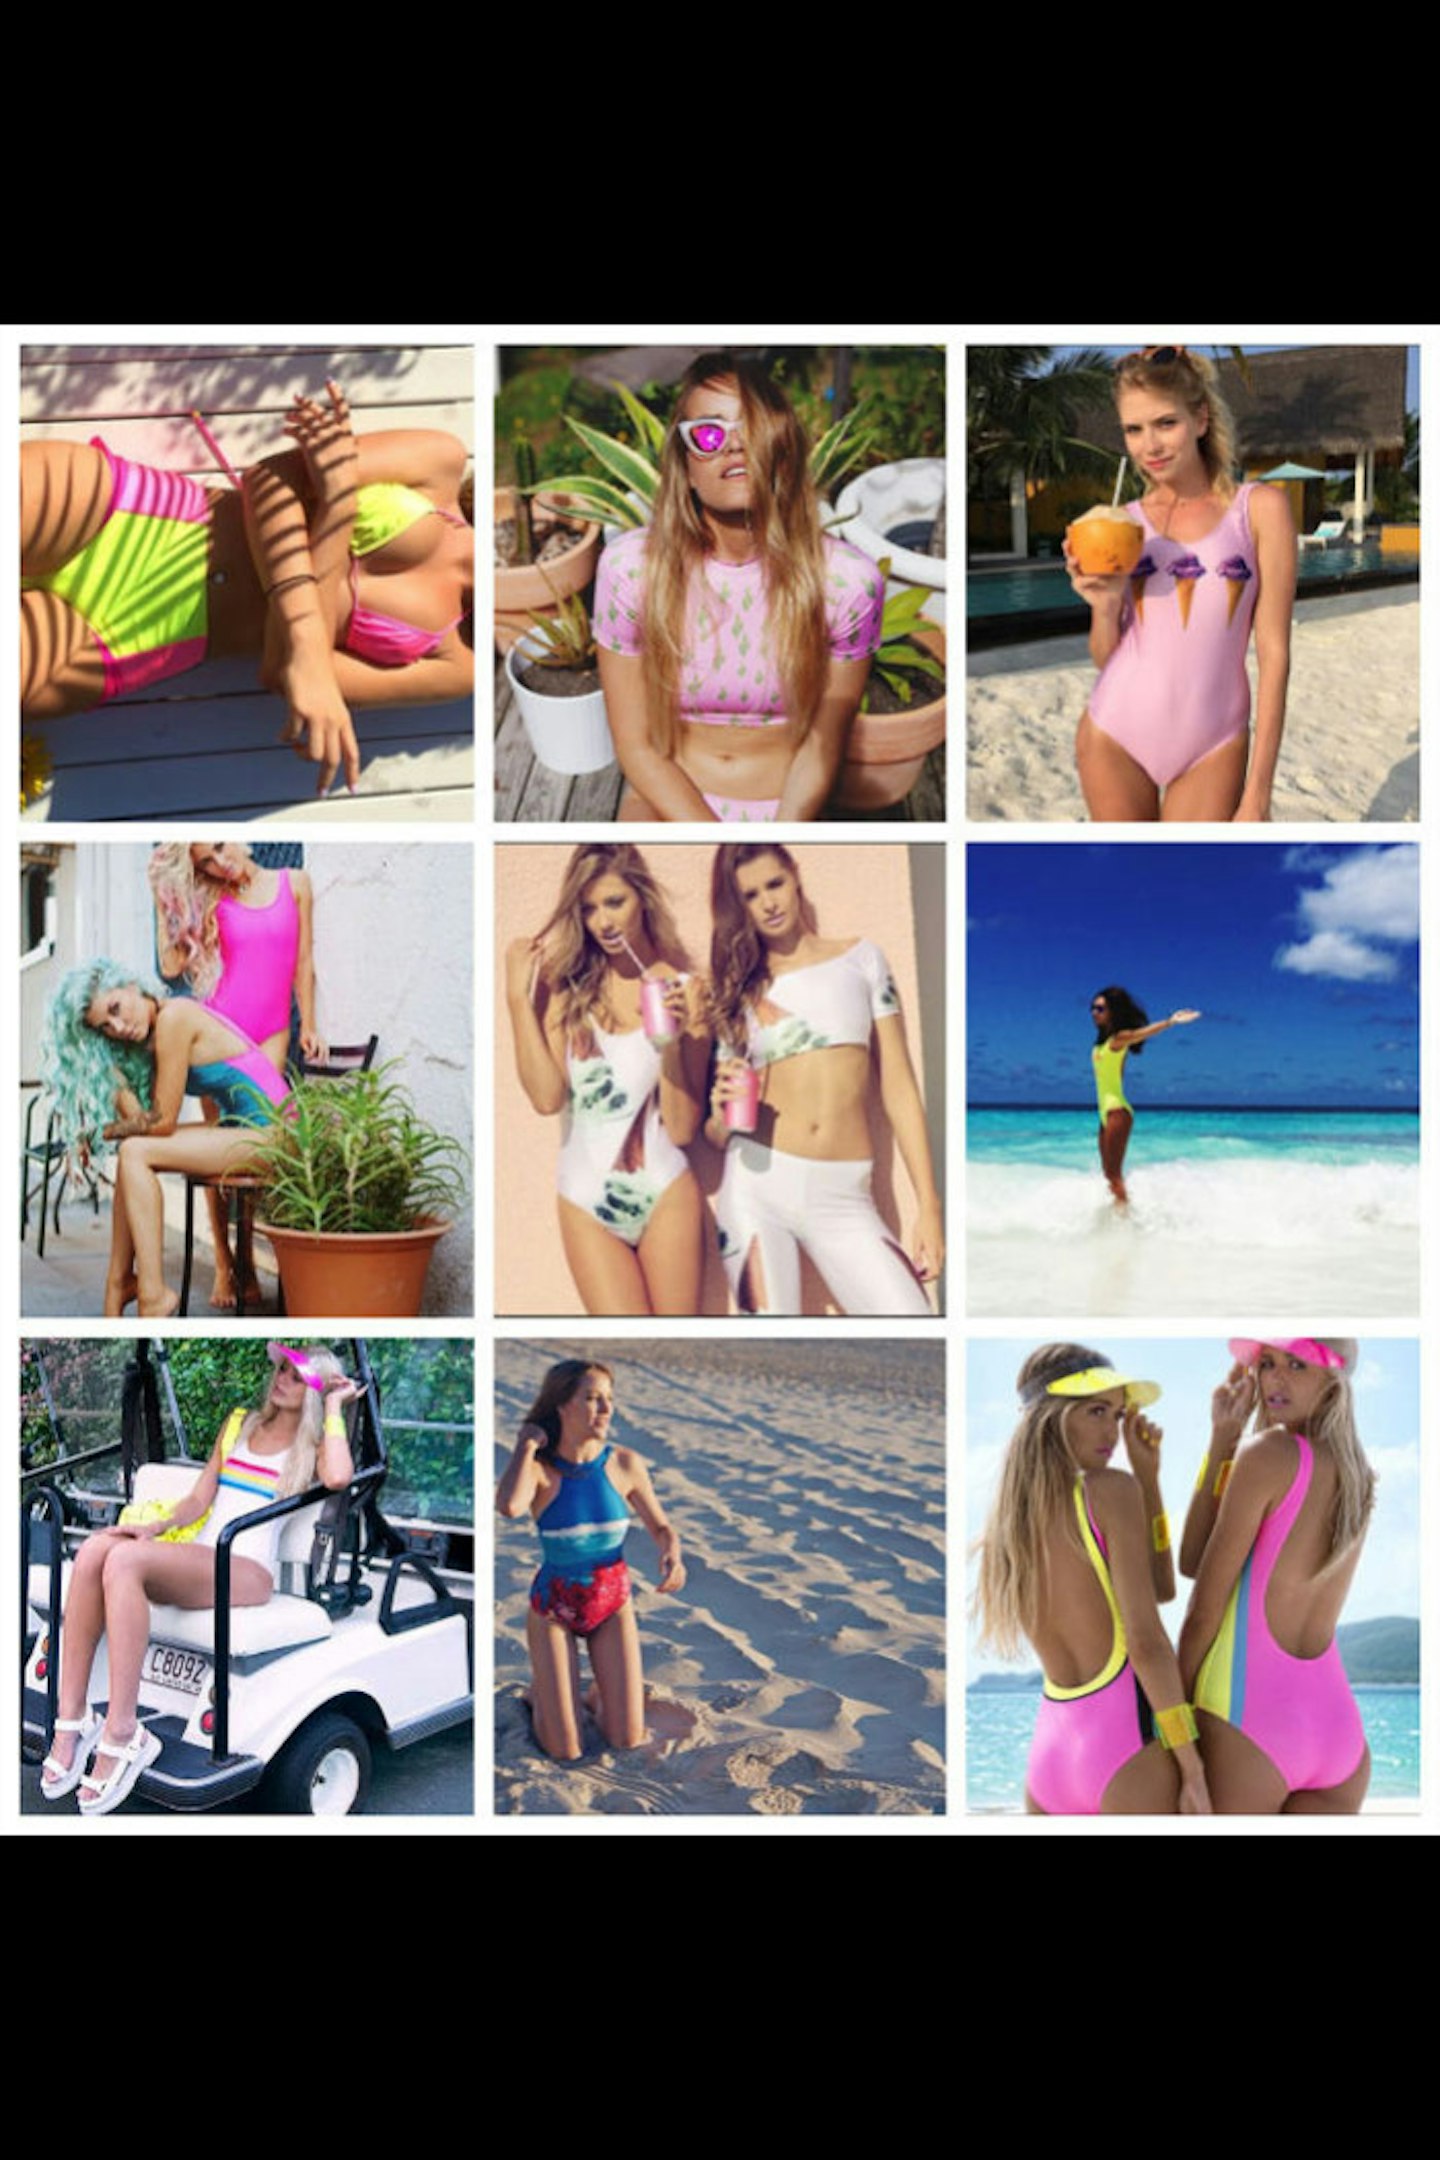 13. MOLLY AND POLLY SWIMWEAR